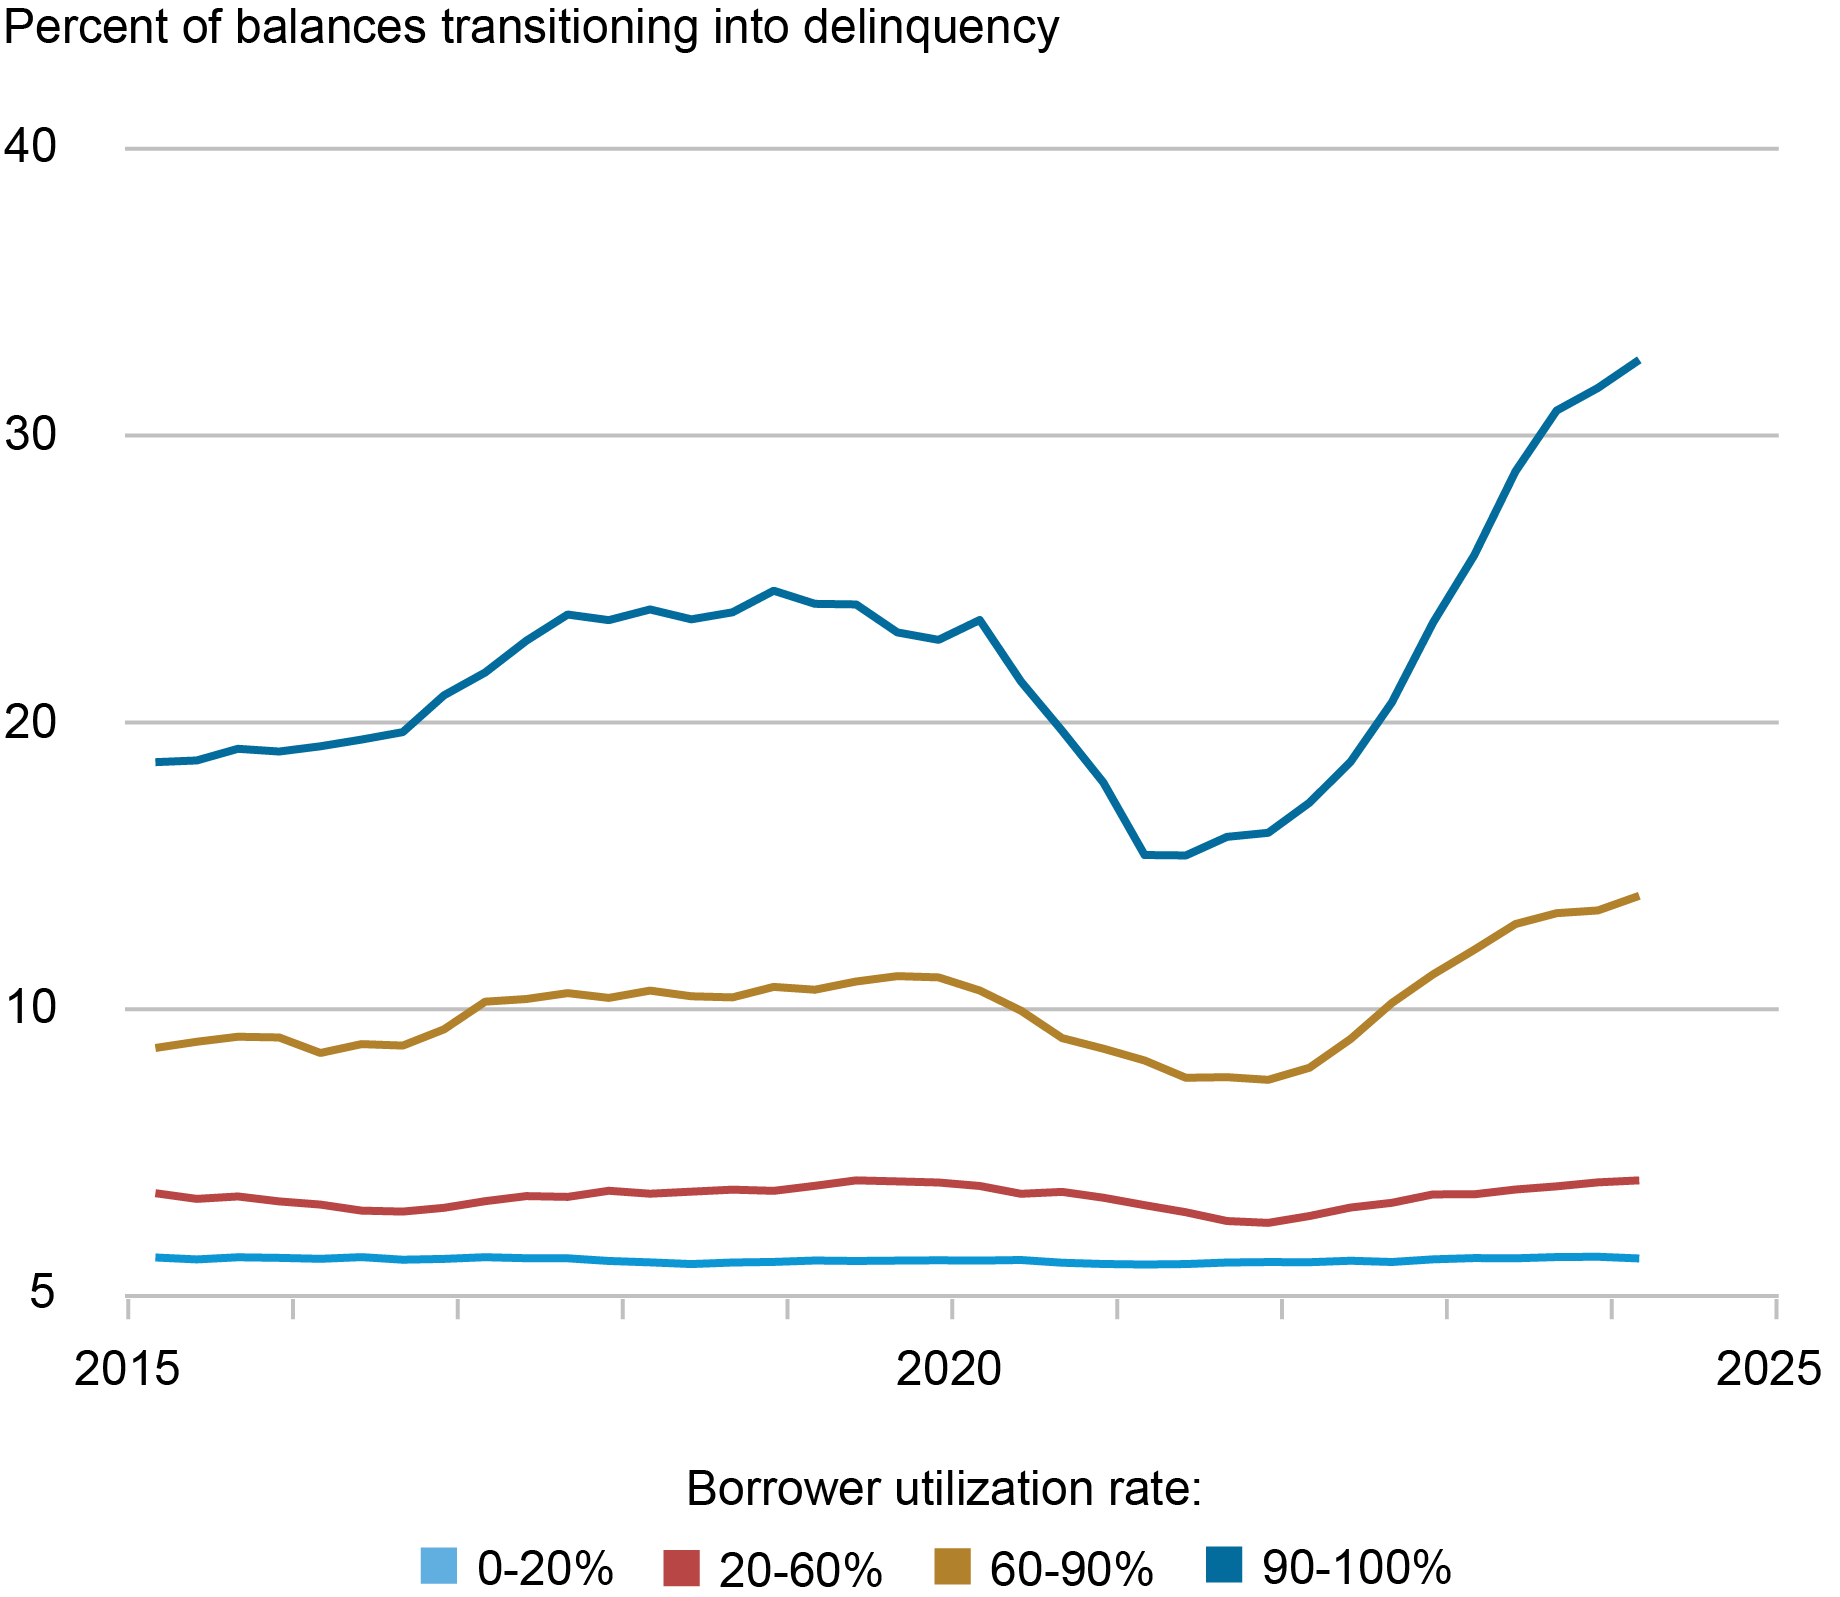 Line chart tracking balances transitioning into delinquency by percent from 2015 through 2025 for borrower utilization rates of 0-20% (light blue), 20-60% (red), 60-90% (gold), and 90-100% (dark blue).